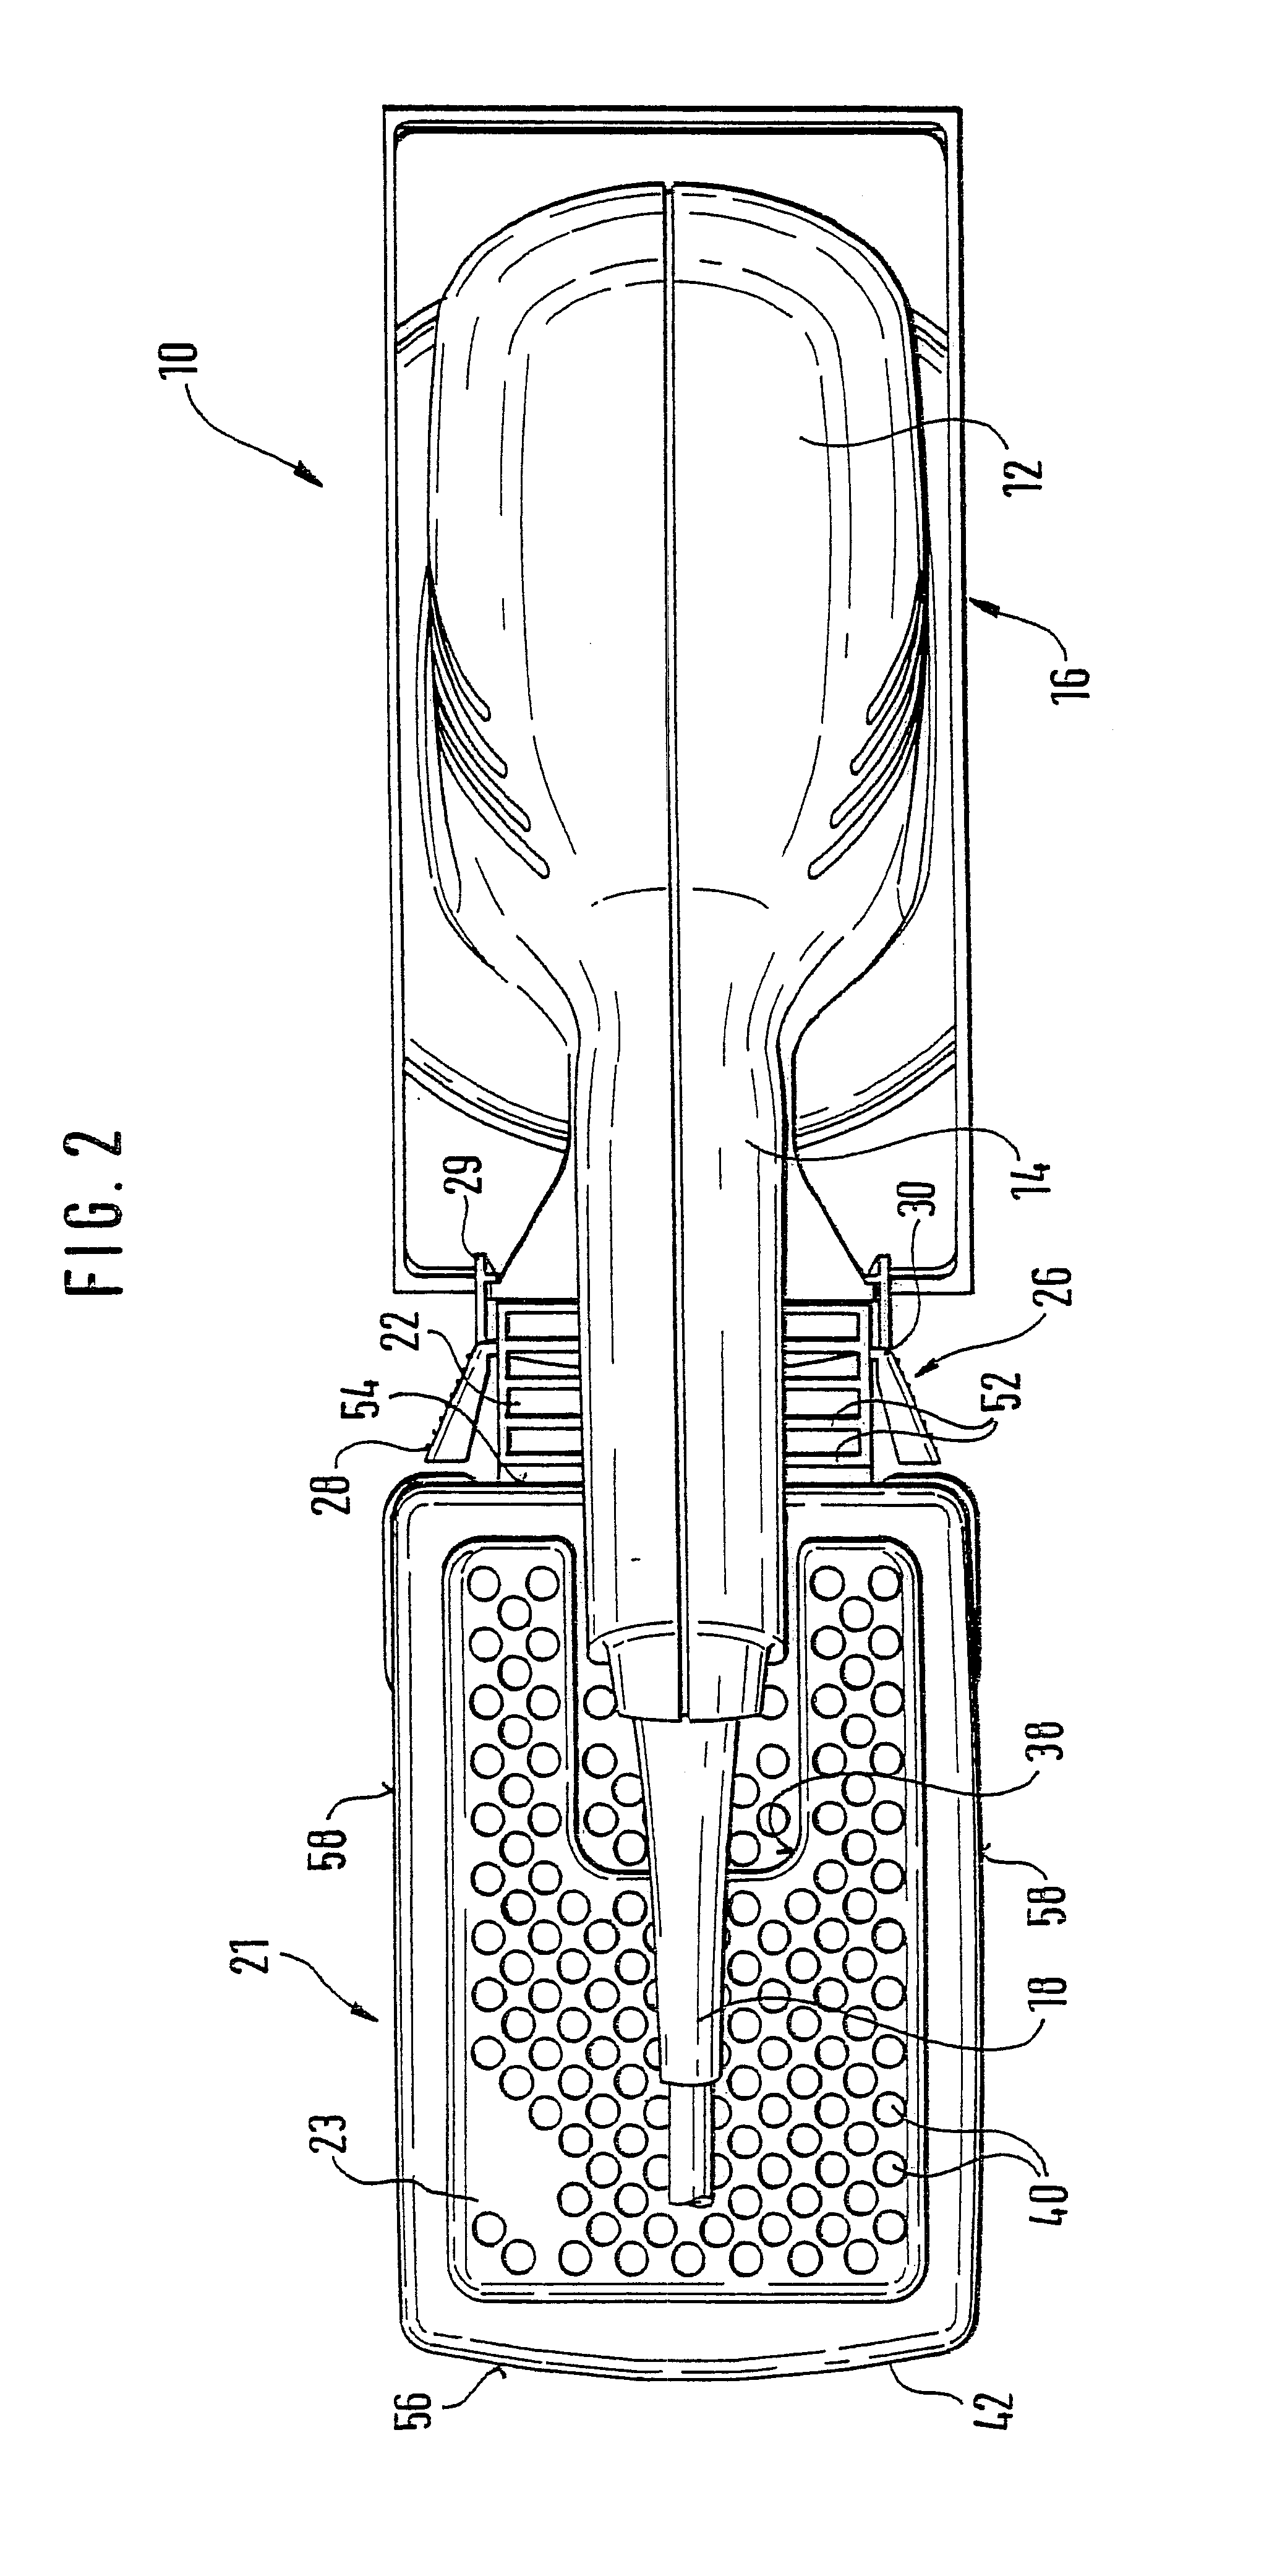 Hand-held machine tool with dust extraction